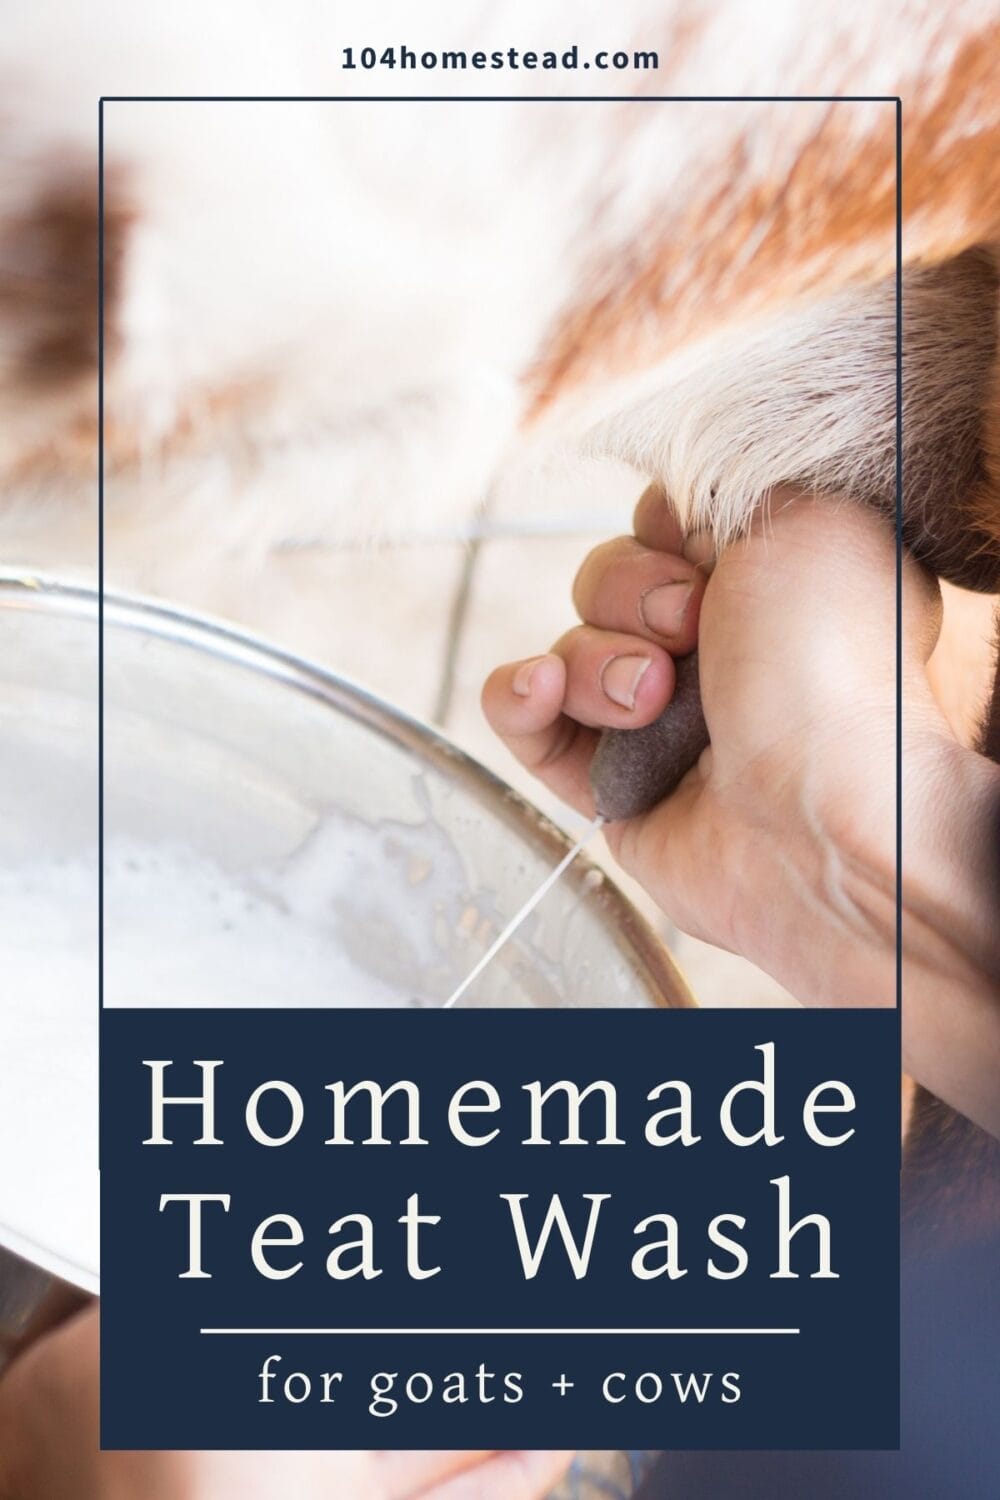 A Pinterest-friendly graphic for my homemade natural teat wash recipe.